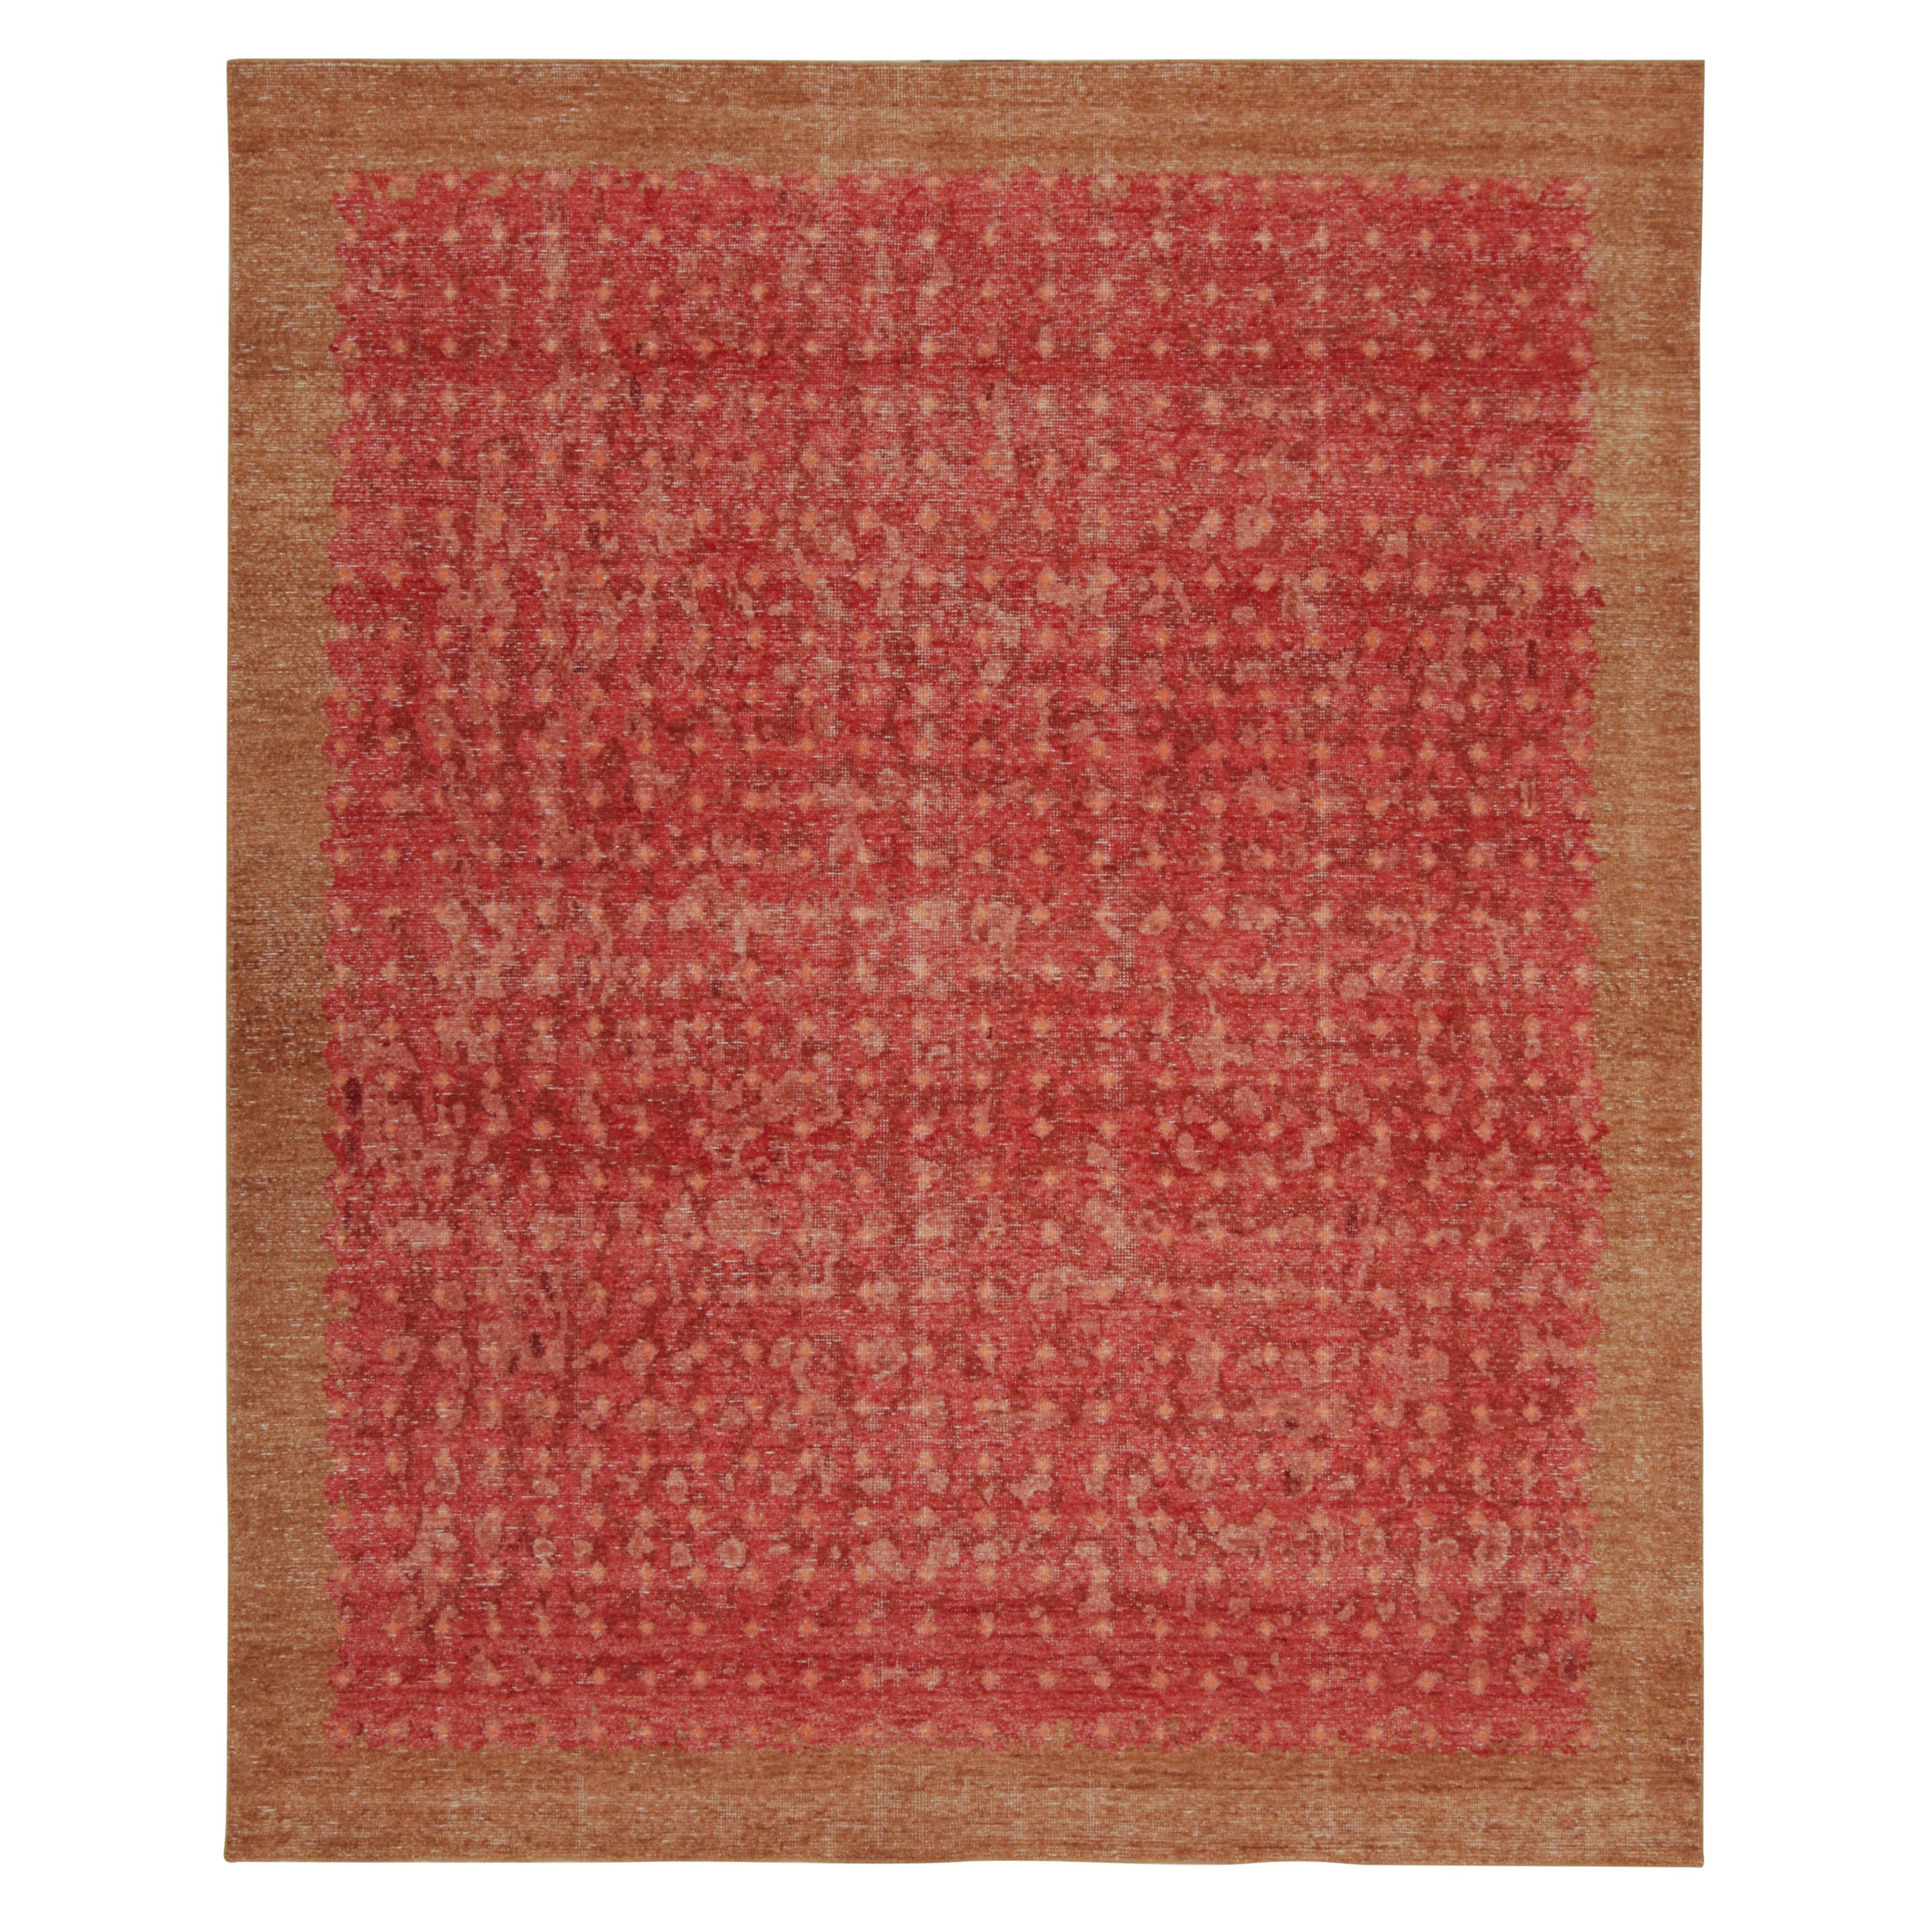 Rug & Kilim’s Distressed style Transitional rug in Red Geometric Patterns